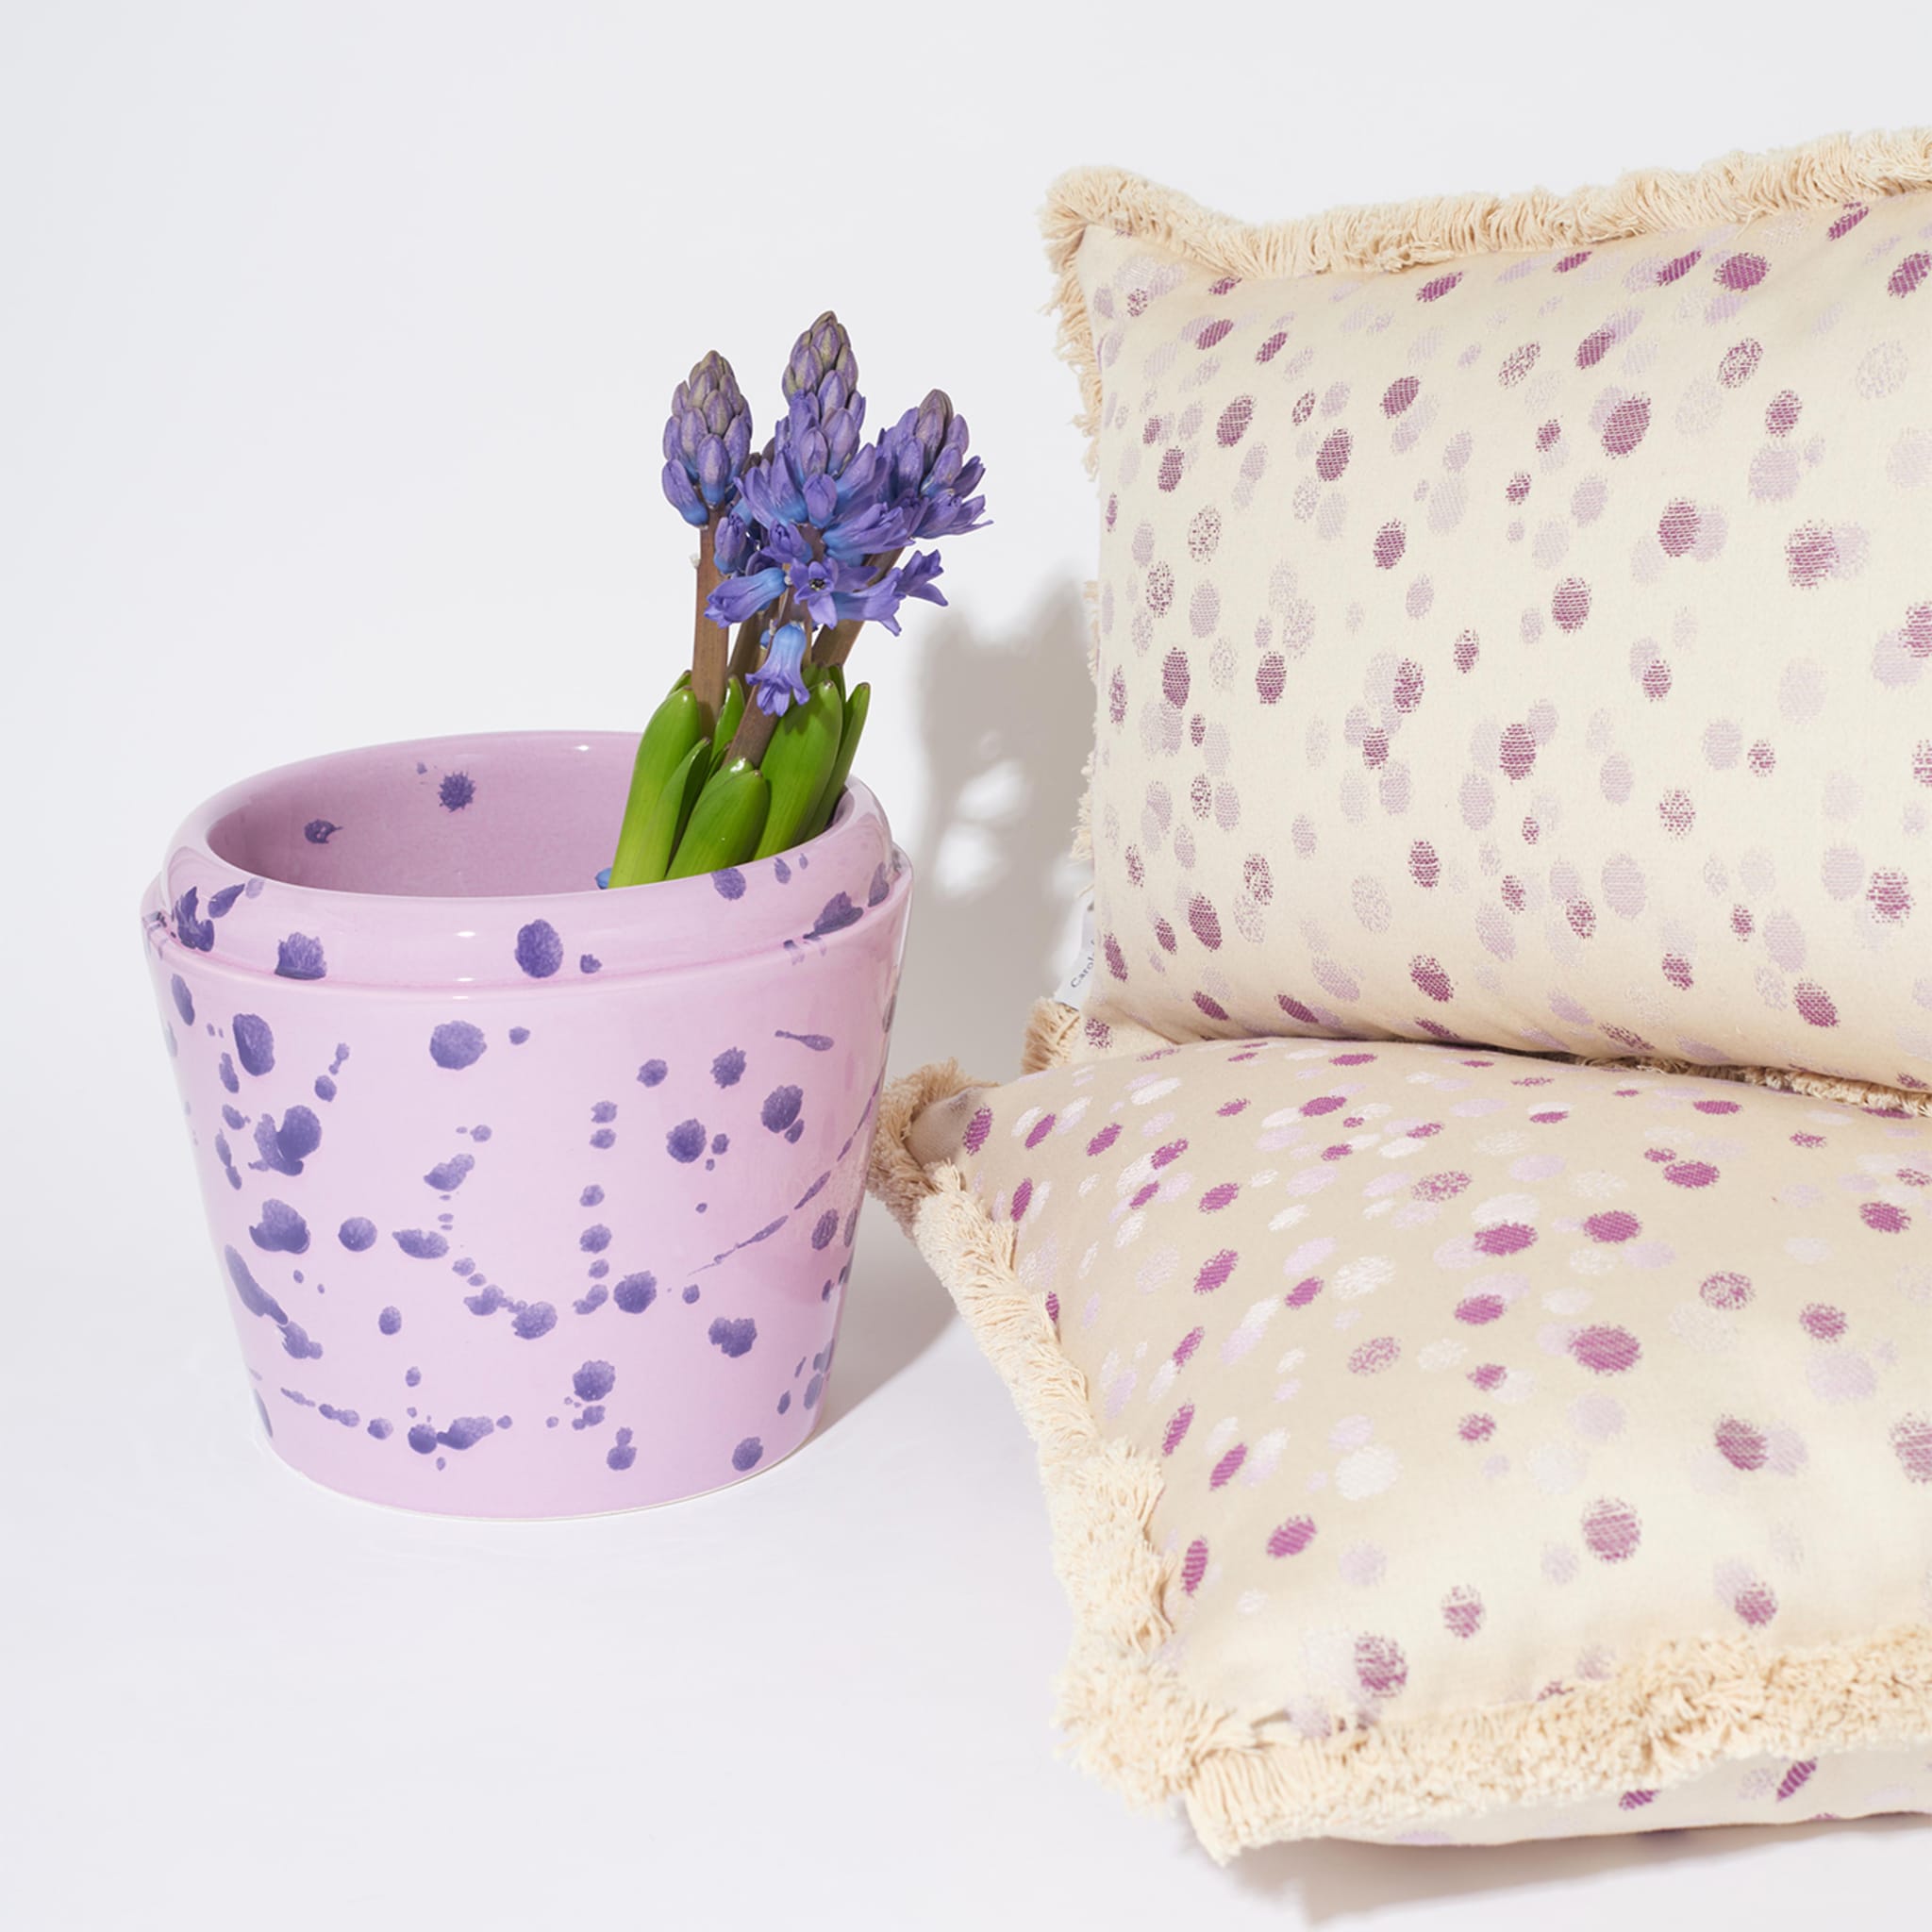 Large Lilac and Violet Fringed Cushion  - Alternative view 1